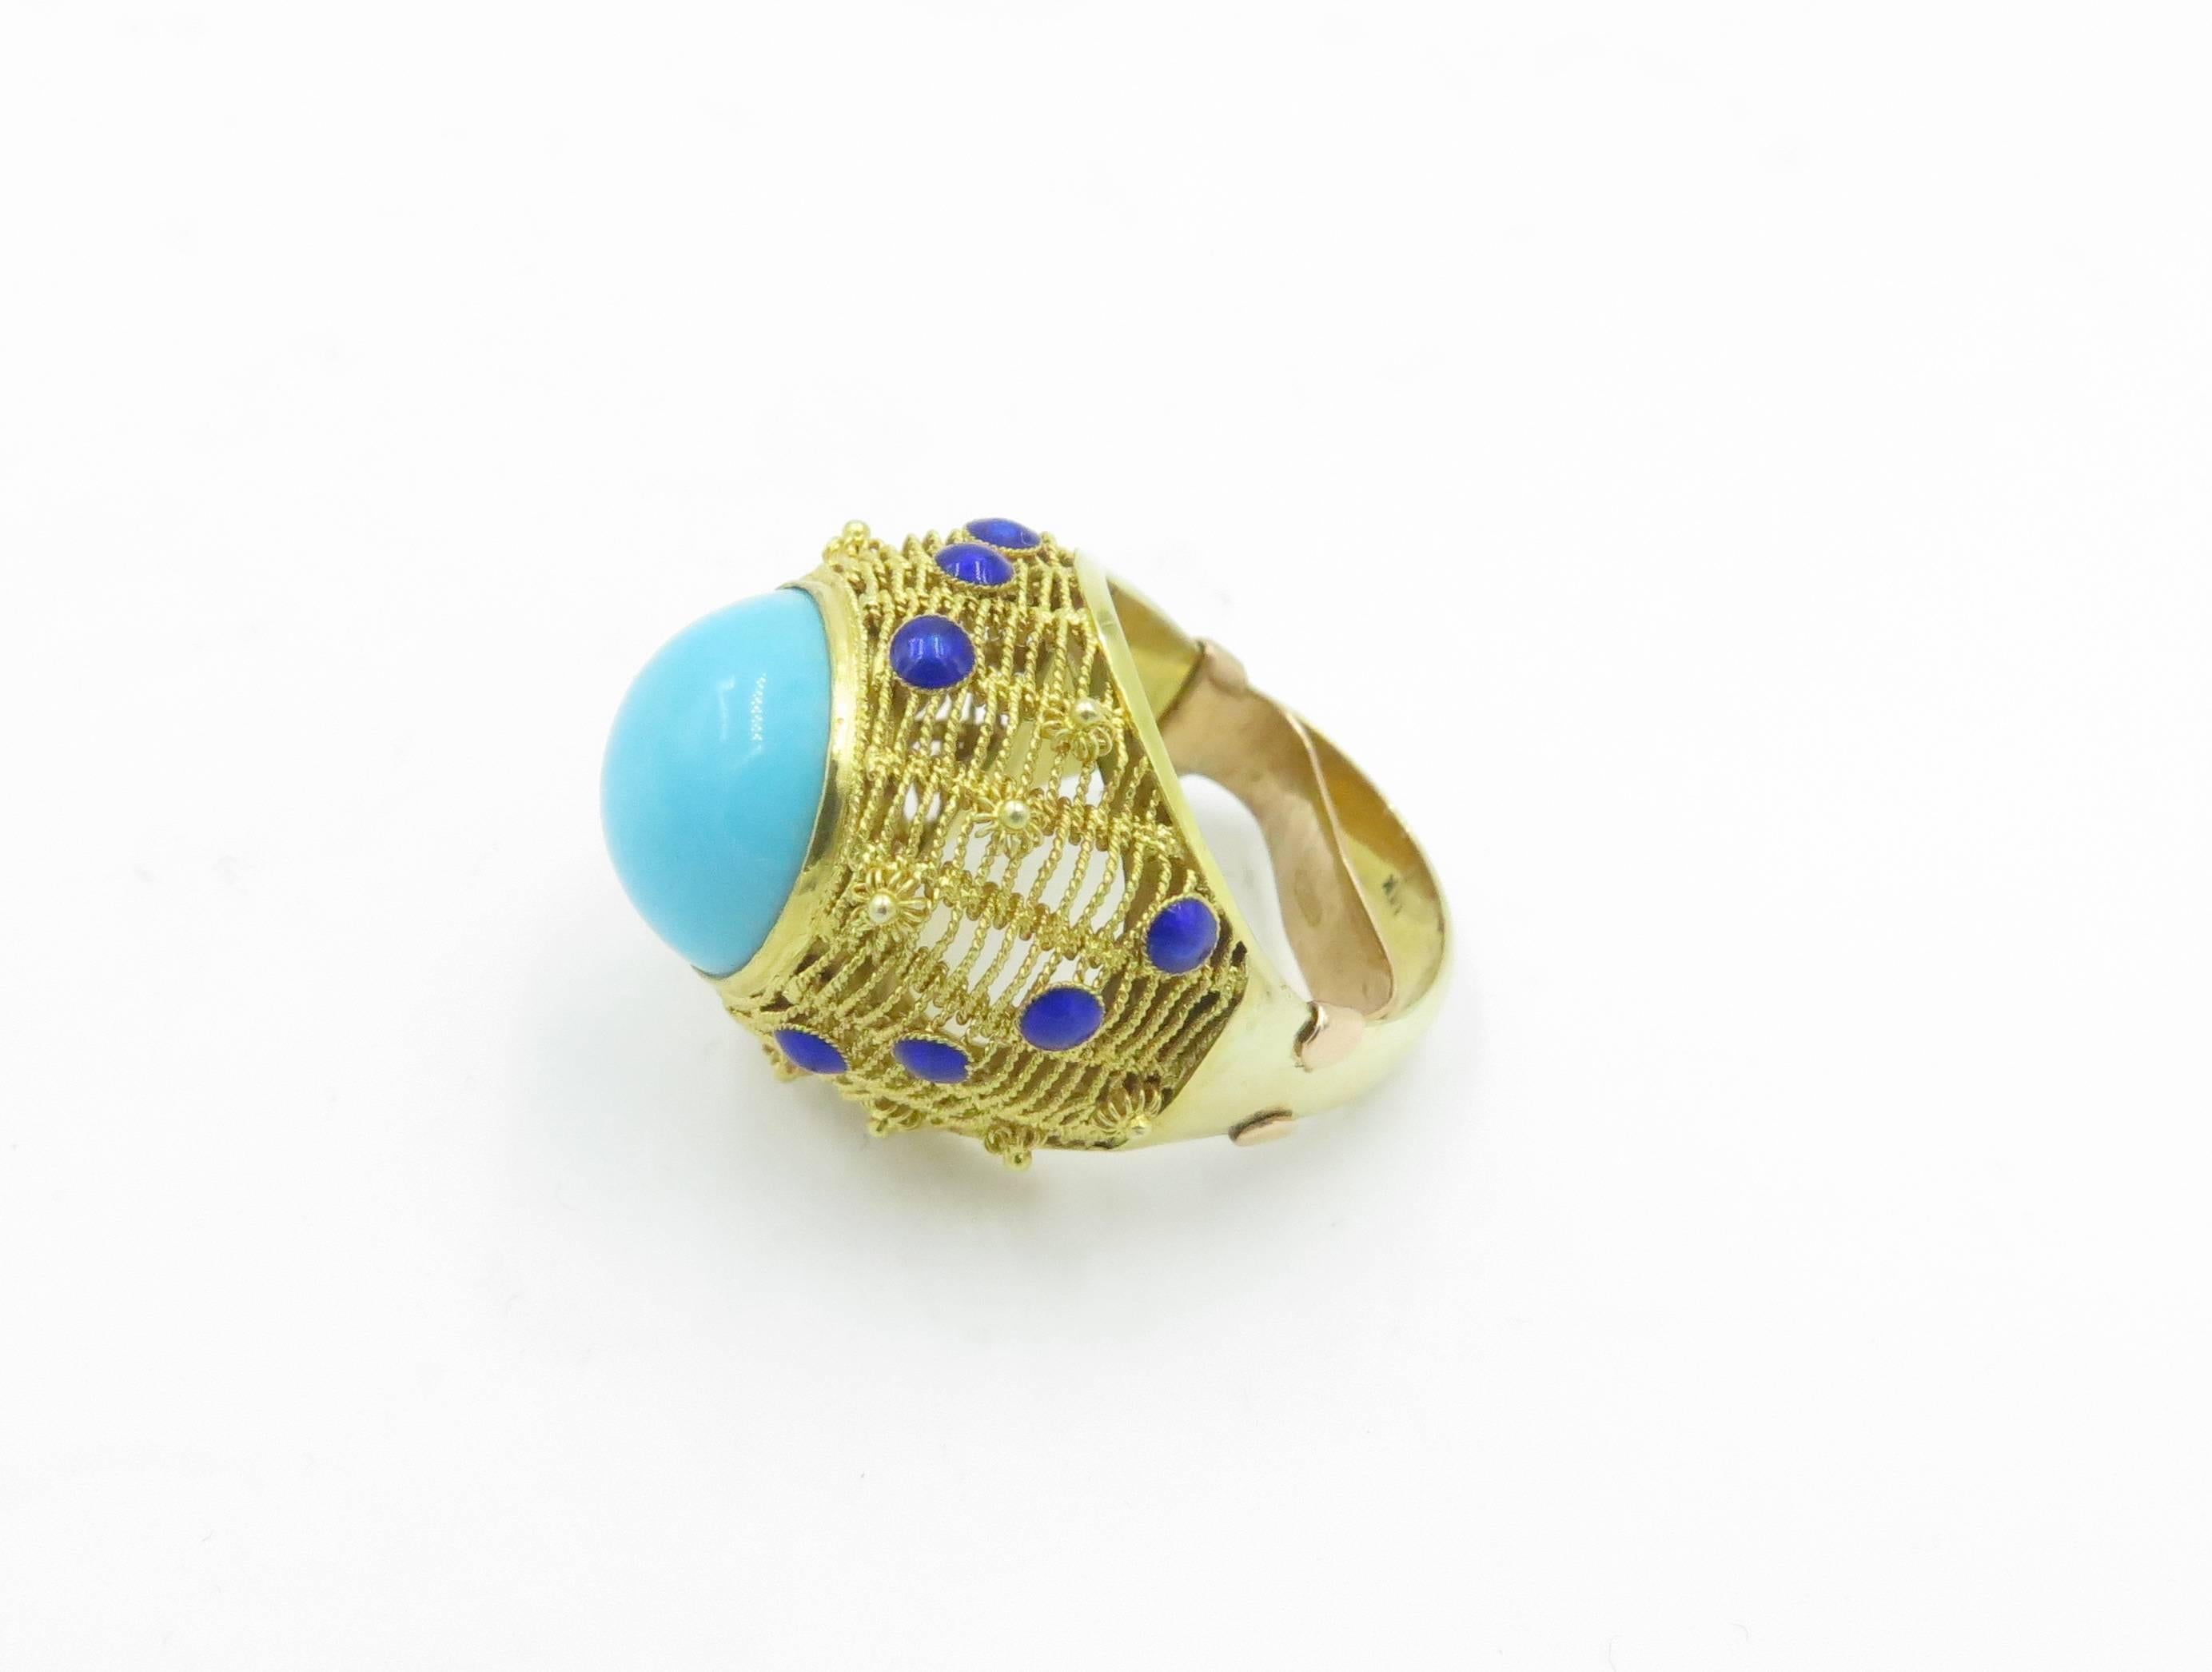 Turquoise, Lapis Lazuli and Gold Dome Ring 1